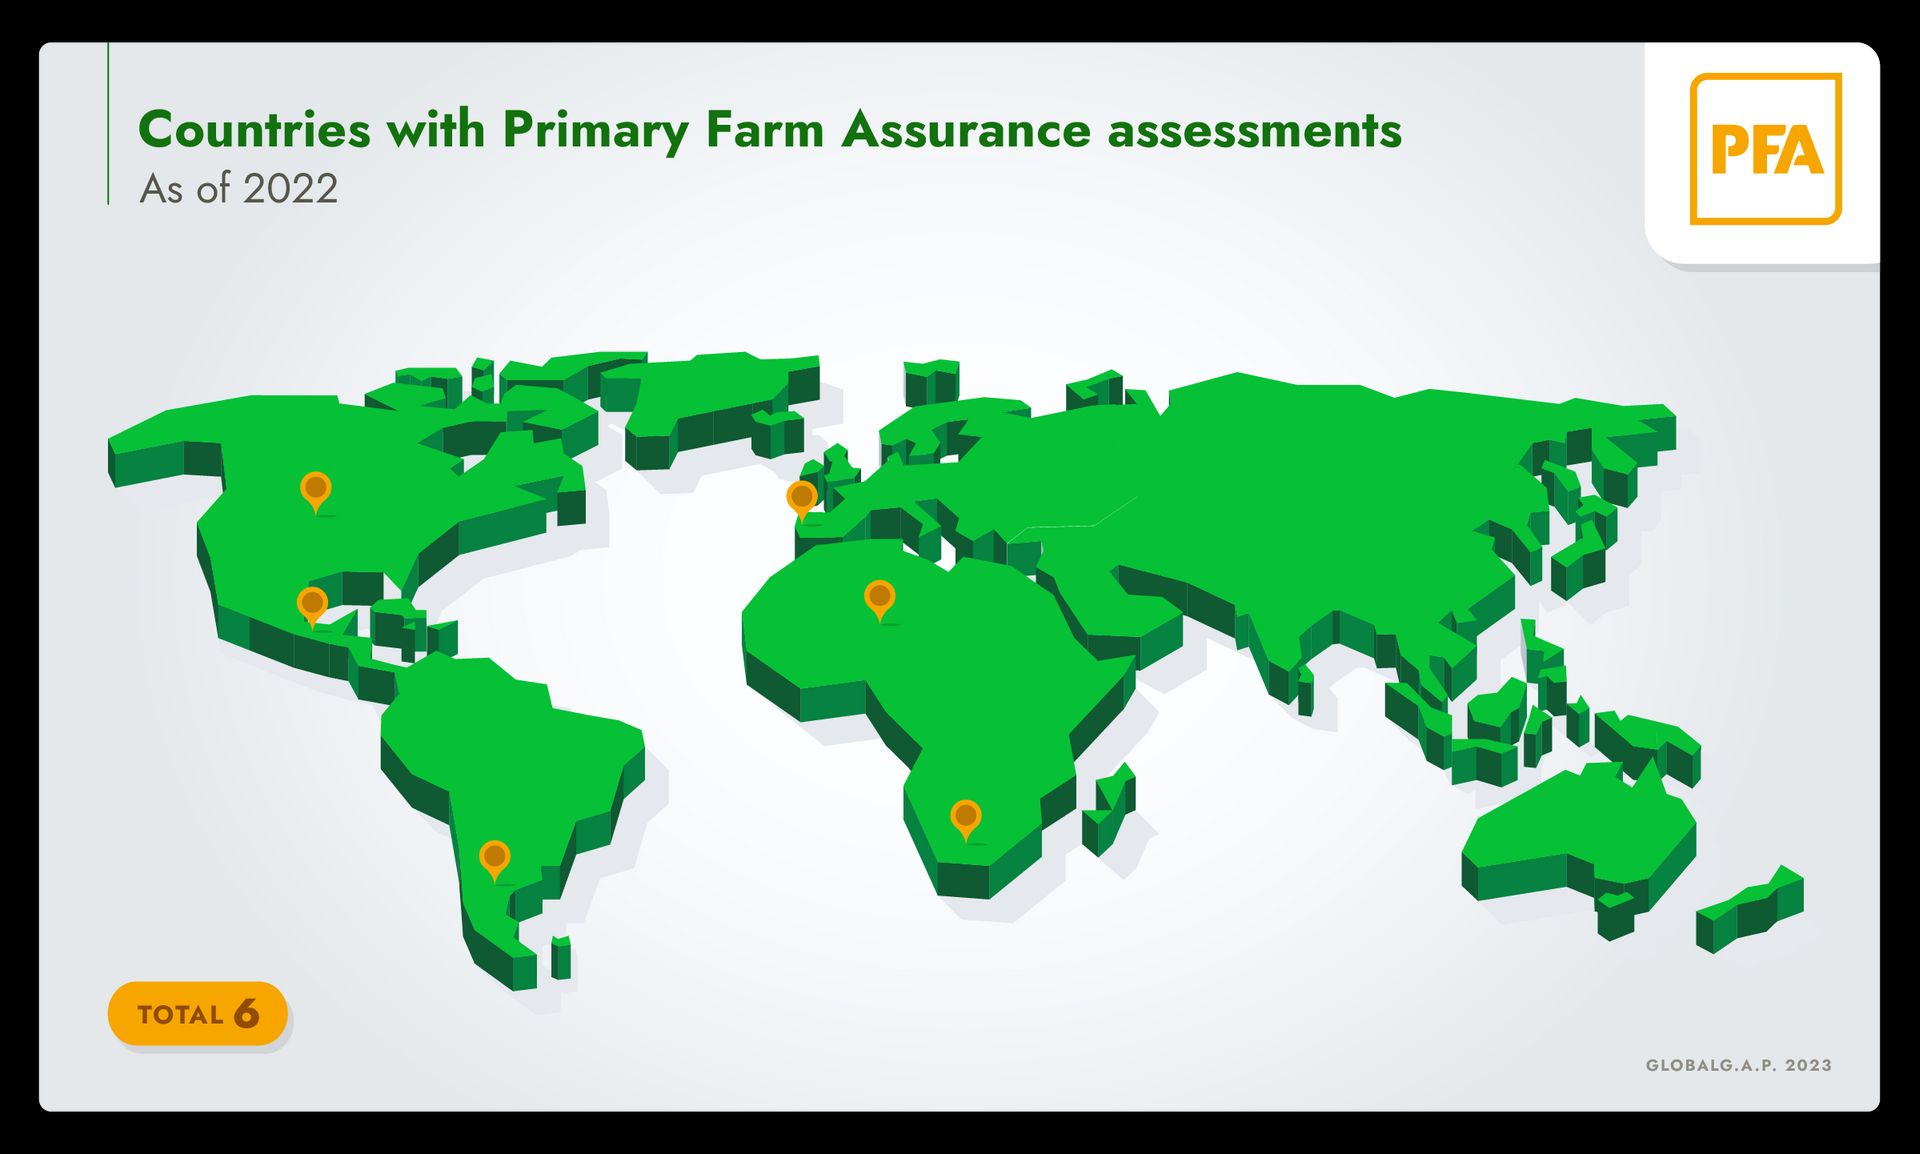 Infographic of a world map showing countries with Primary Farm Assurance implementation in 2022: South Africa, Guatemala, Argentina, Nigeria, Portugal, USA 